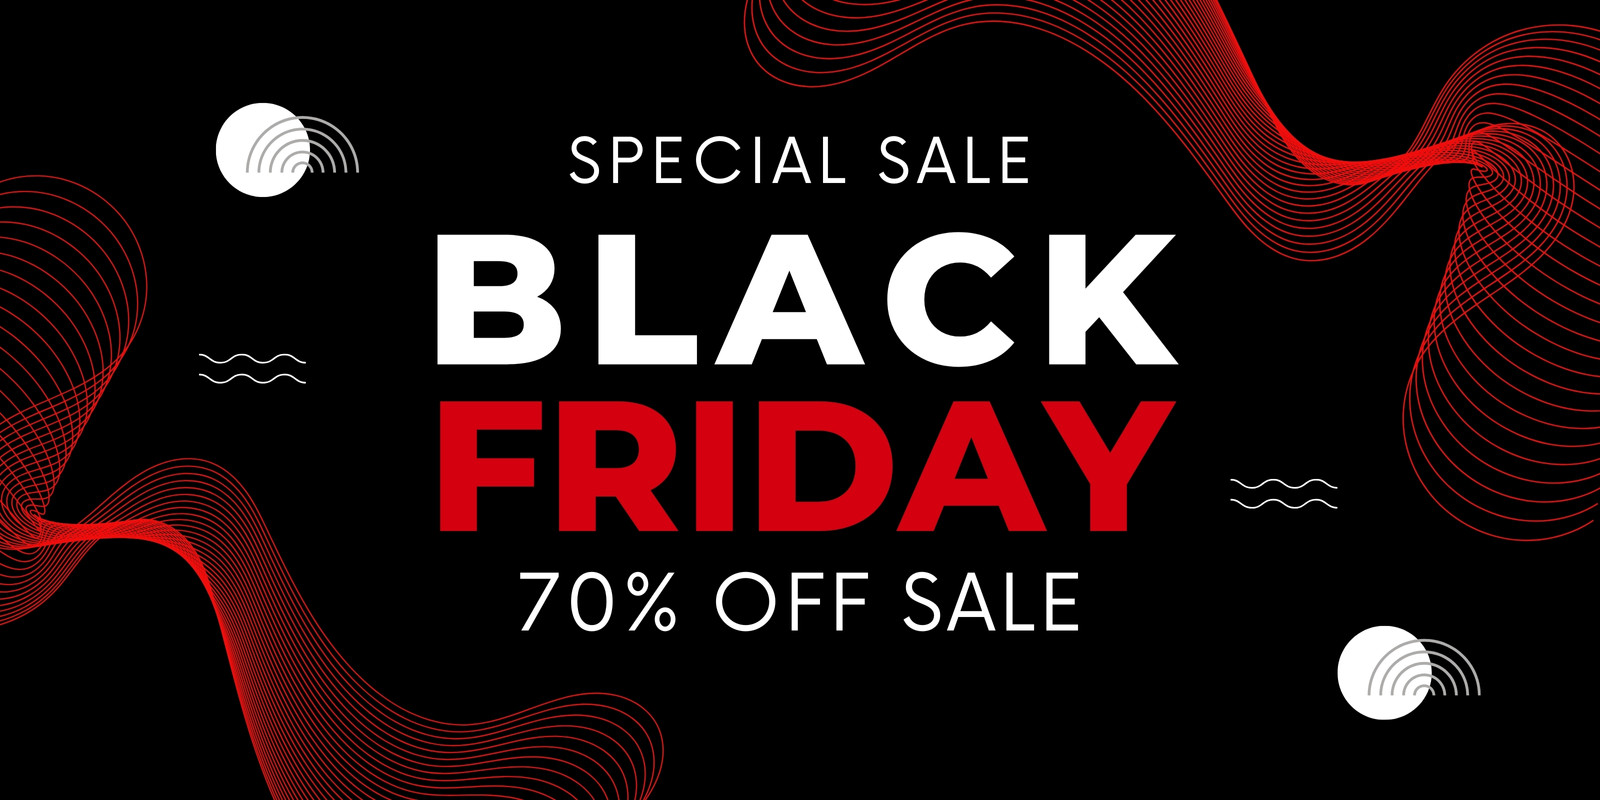 Page 4 - Free and customizable black friday templates